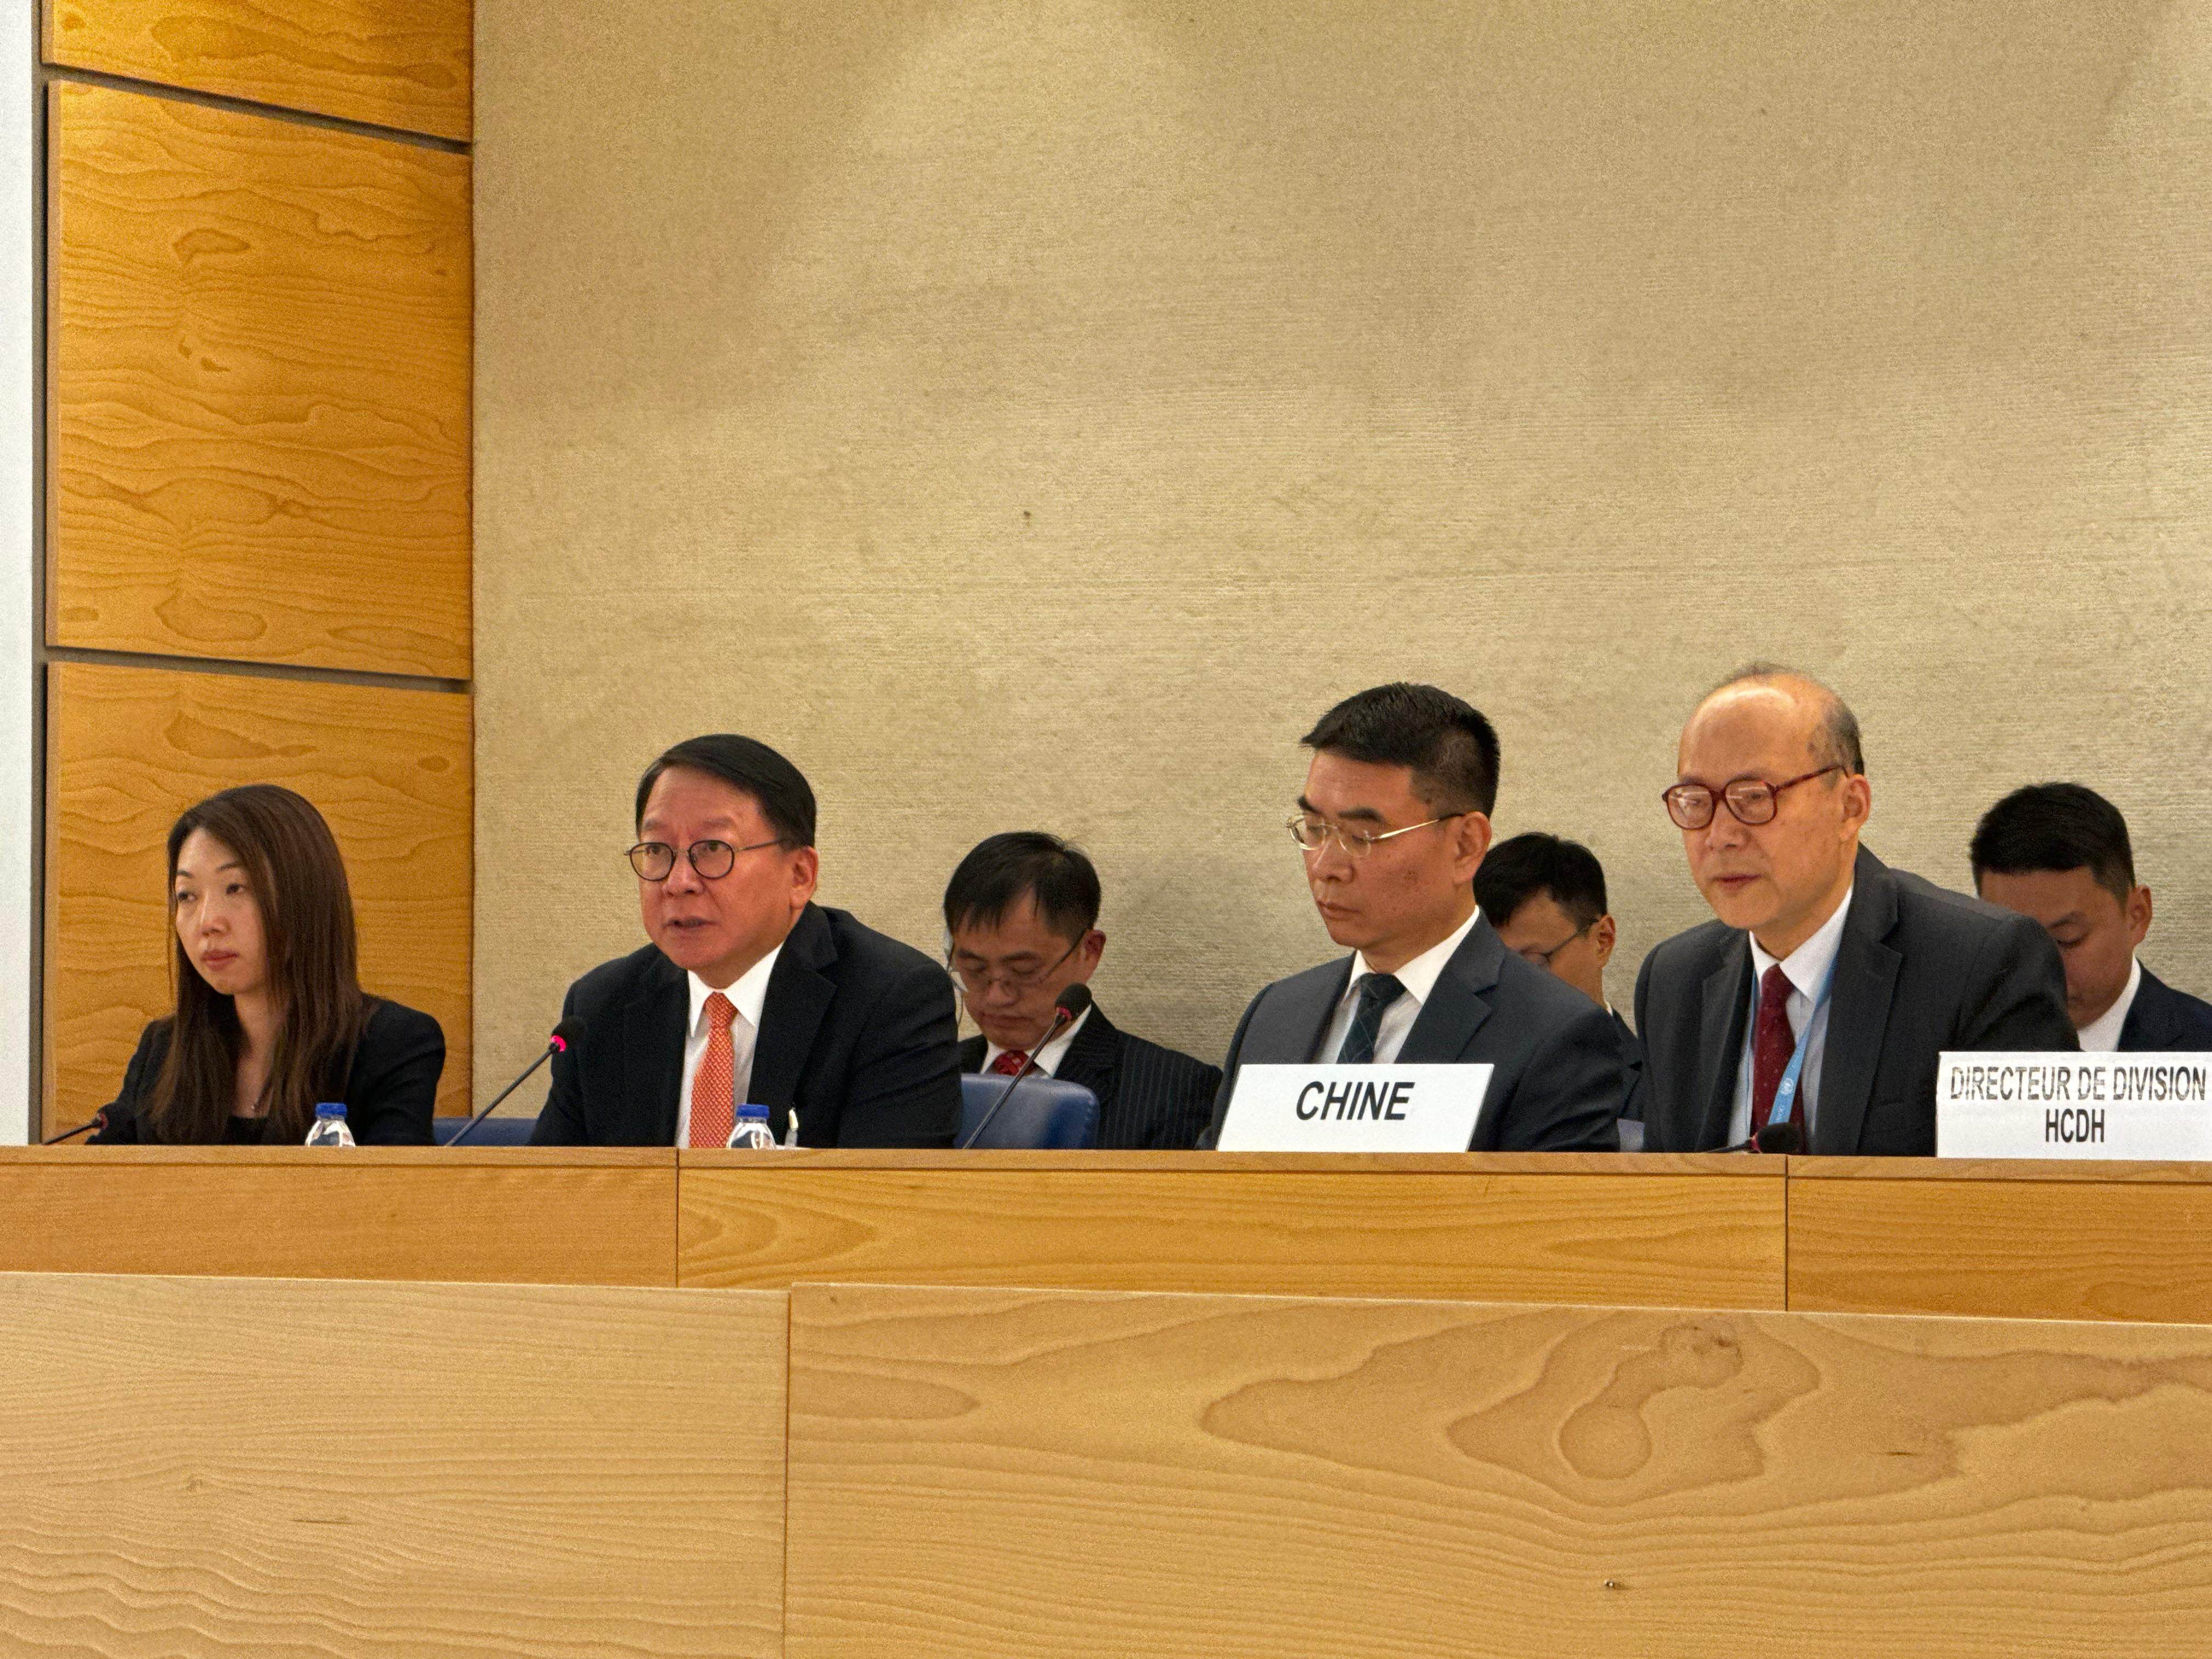 Chief Secretary Eric Chan (second from left) speaks at the plenary meeting of the United Nations Human Rights Council in Geneva, Switzerland. Photo: Handout